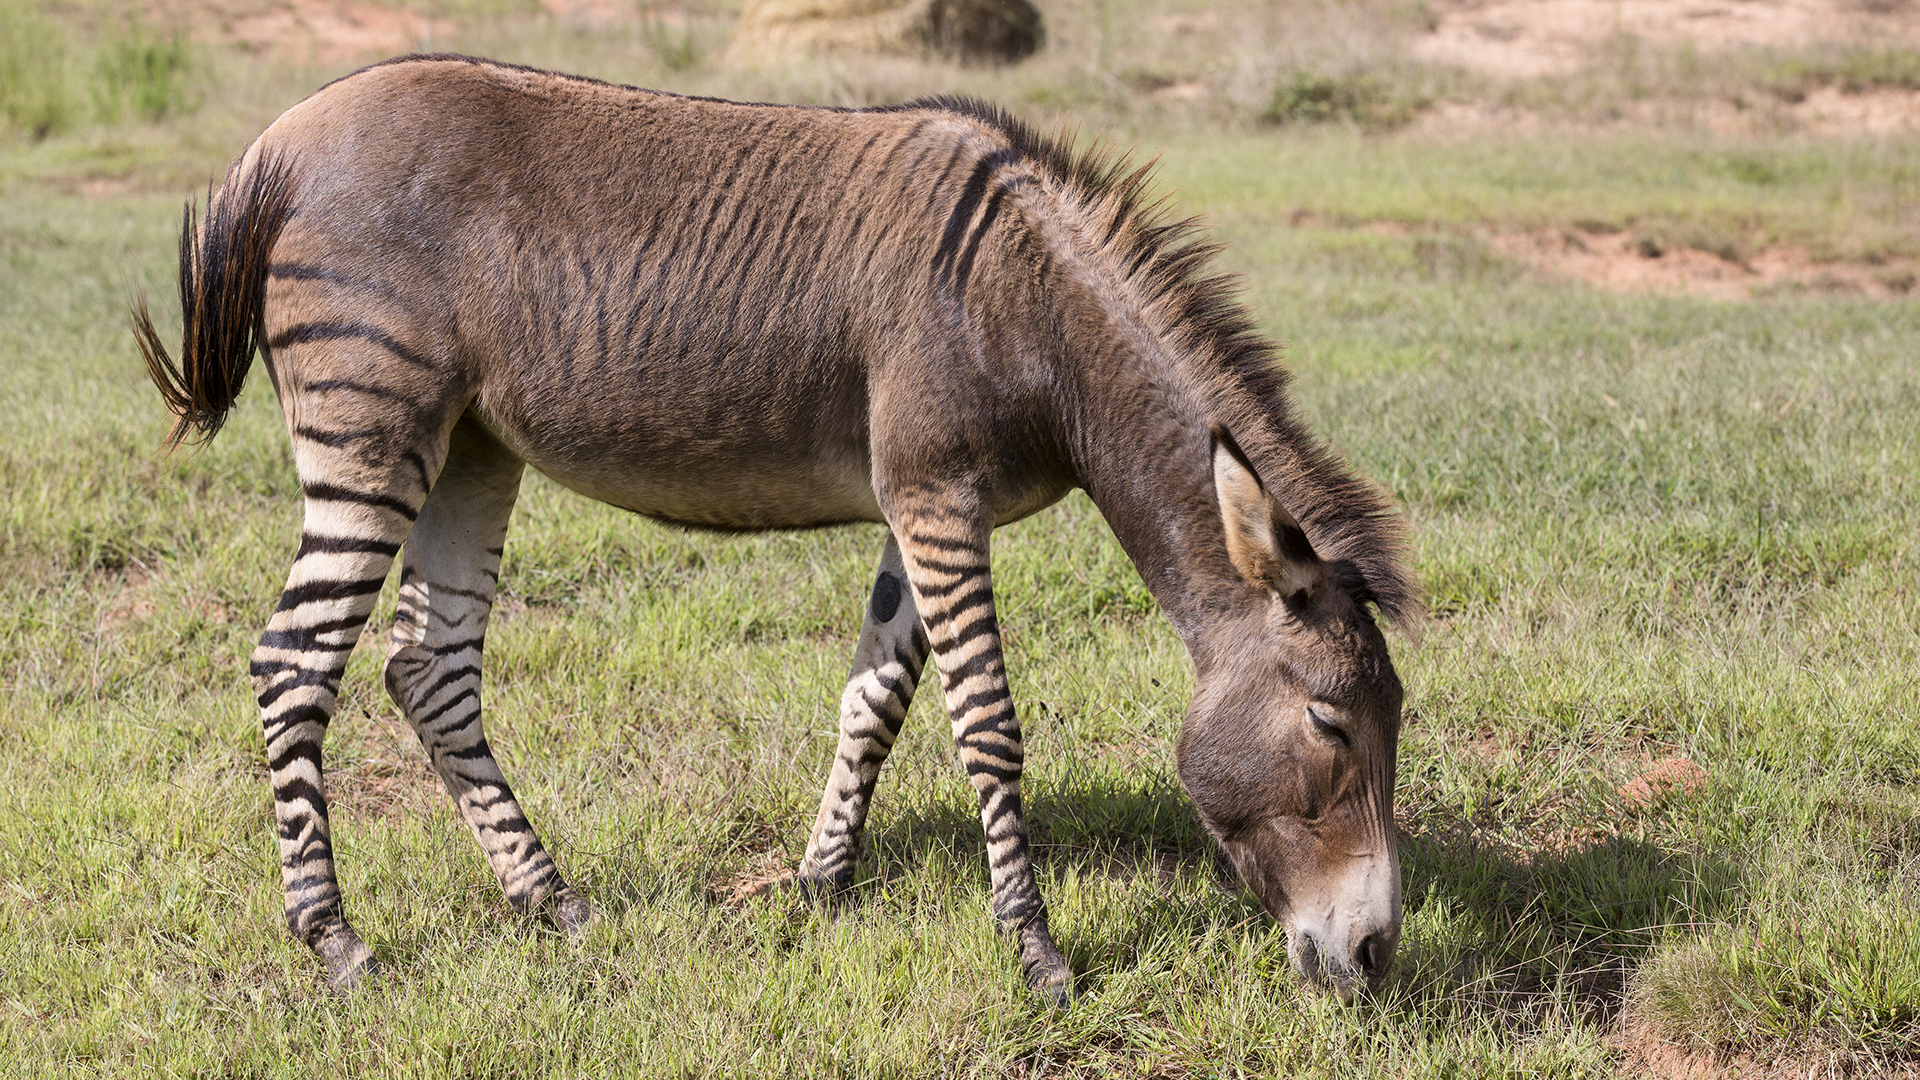 A zedonk is a hybrid offspring of a donkey and a zebra. They are also called zonkeys.